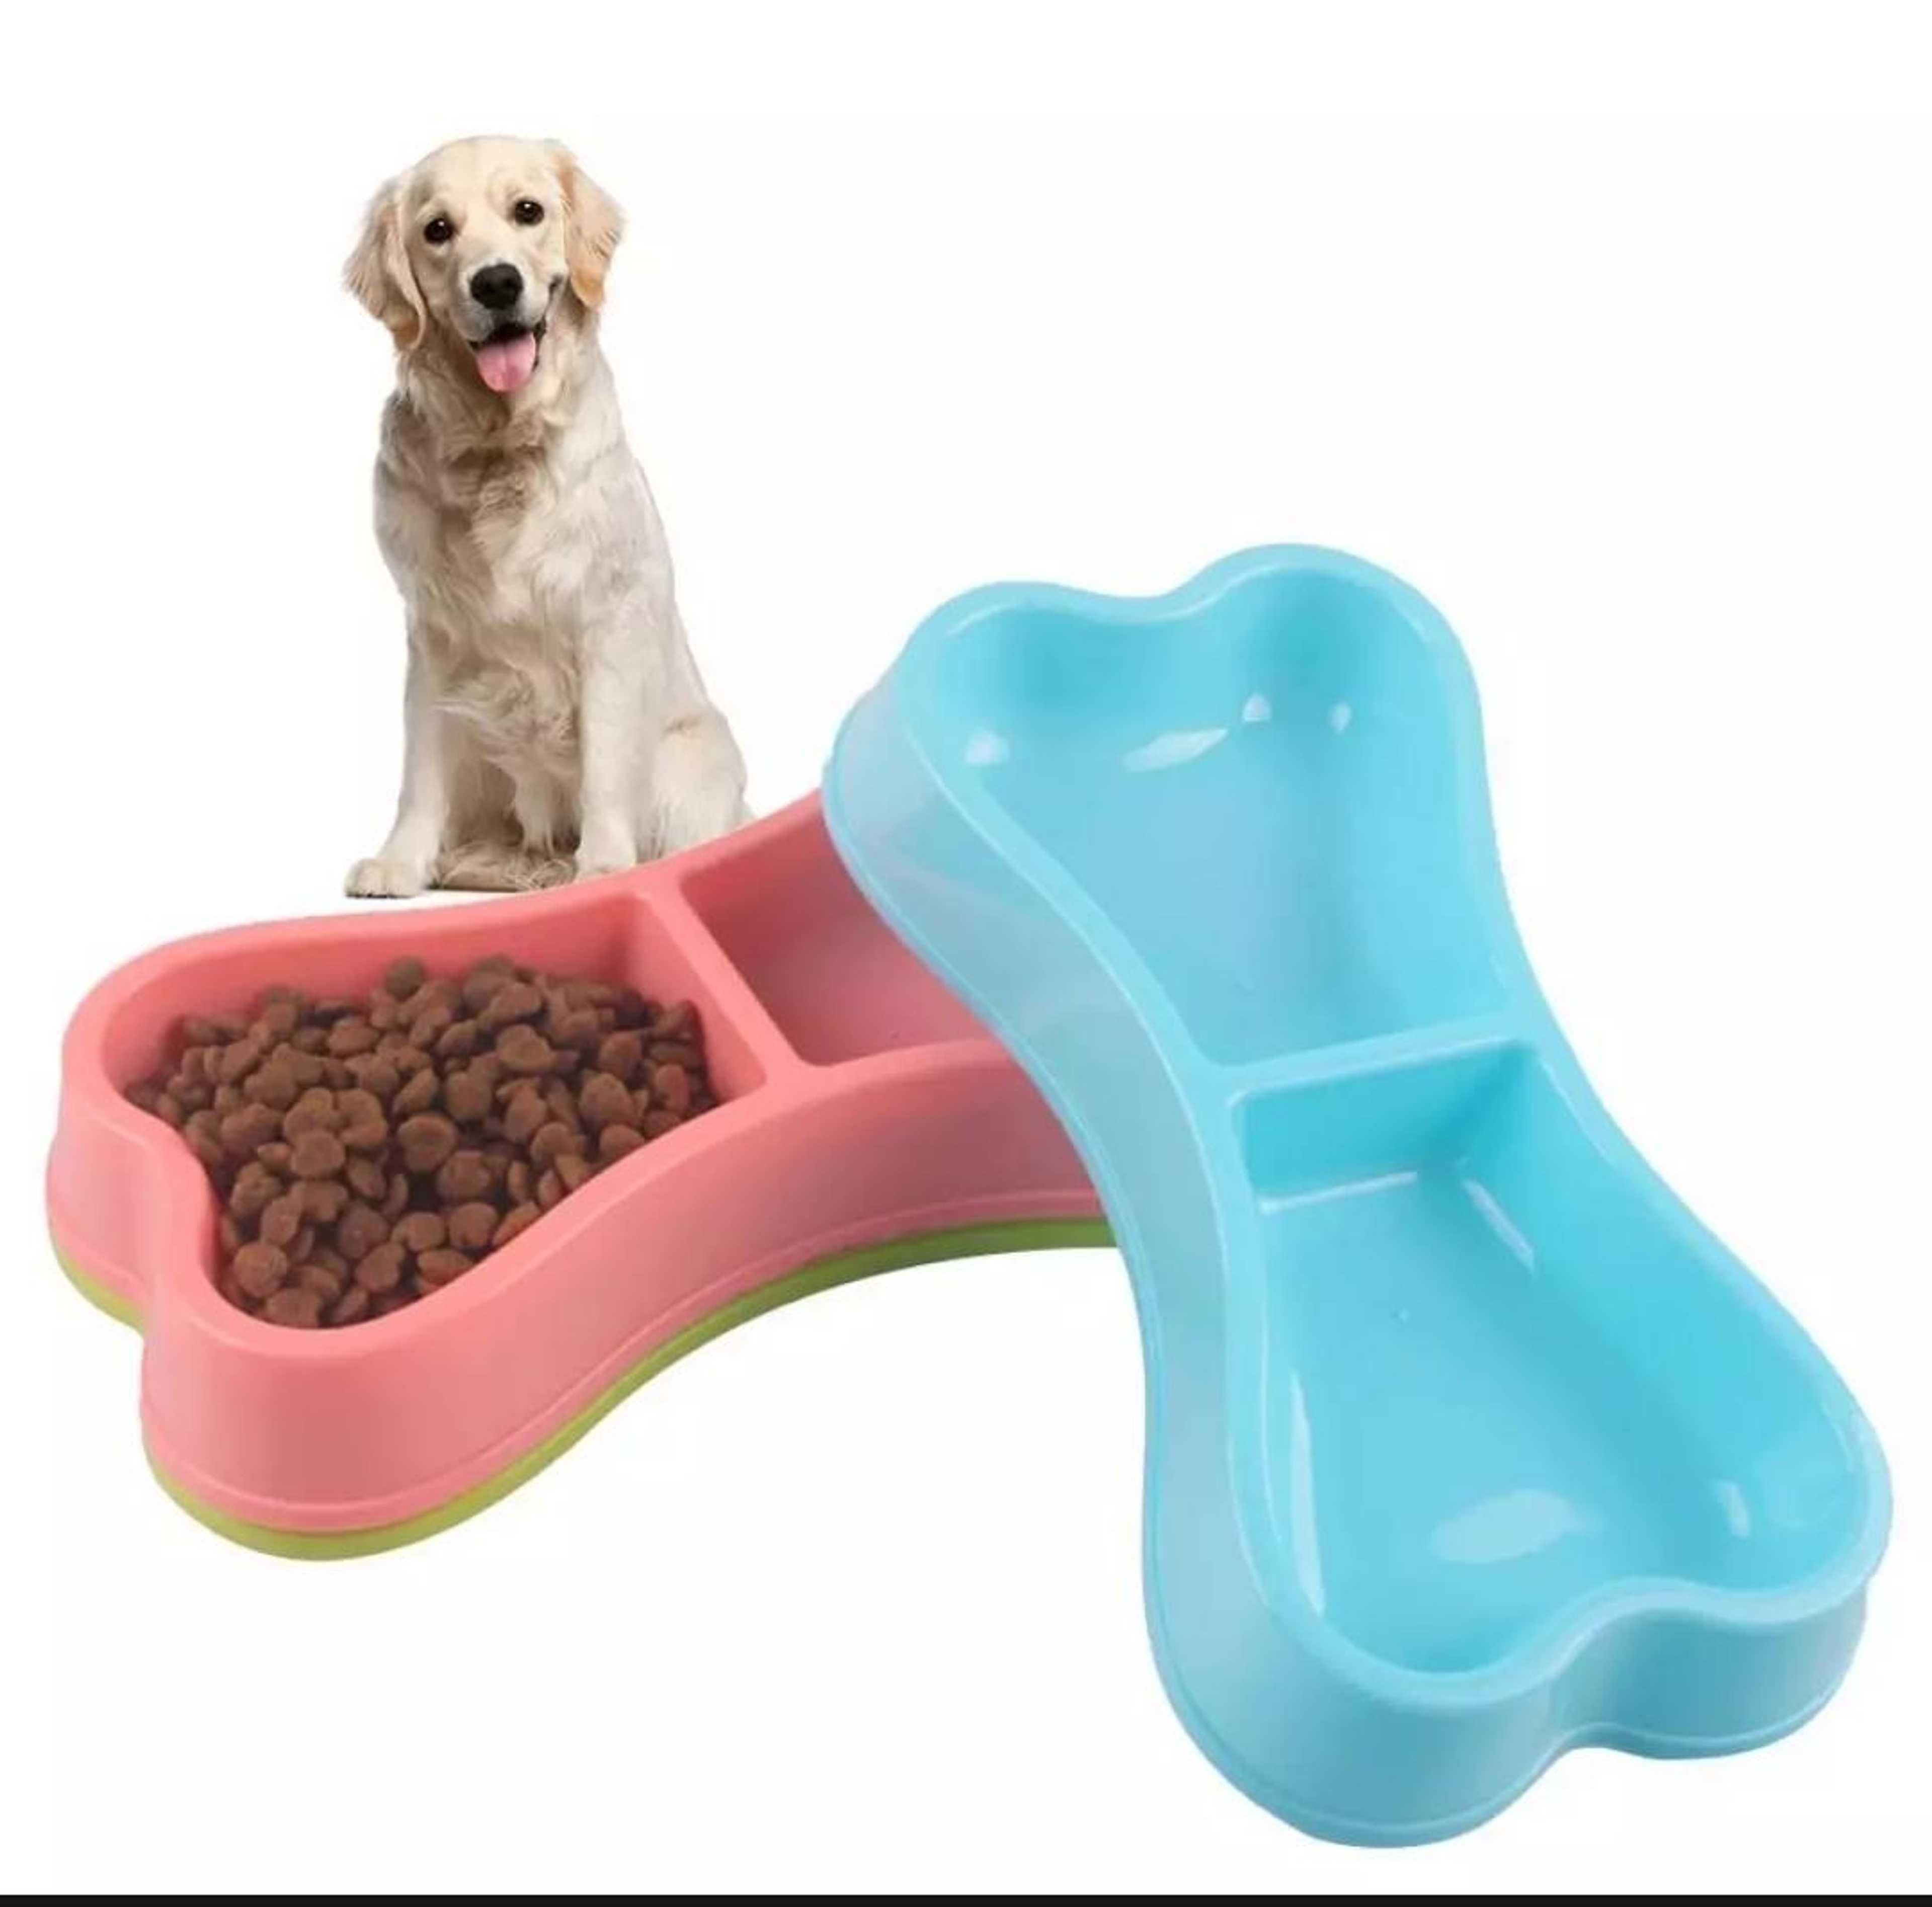 Bone Shaped - Double Food Bowl in Different Colors